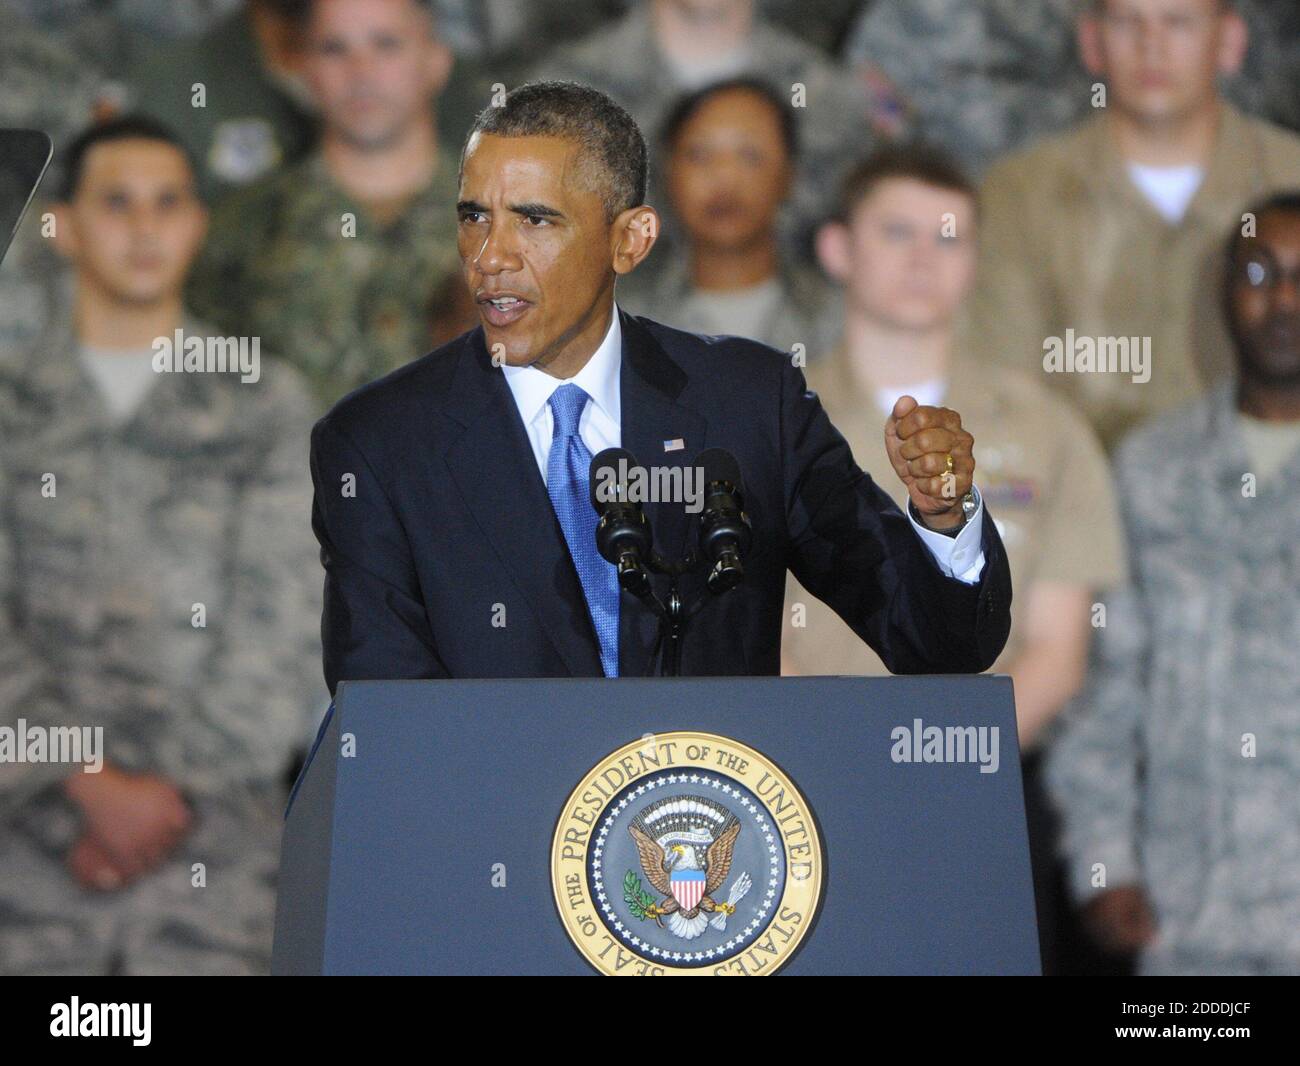 NO FILM, NO VIDEO, NO TV, NO DOCUMENTARY - President Barack Obama addresses military personnel at MacDill Air Force Base in Tampa, FL, USA, on Wednesday, September 17, 2014. The president was briefed by commanders at U.S. Central Command (CENTCOM) regarding the terrorist threat posed by ISIS. Photo by Grant Jefferies/Bradenton Herald/MCT/ABACAPRESS.COM Stock Photo